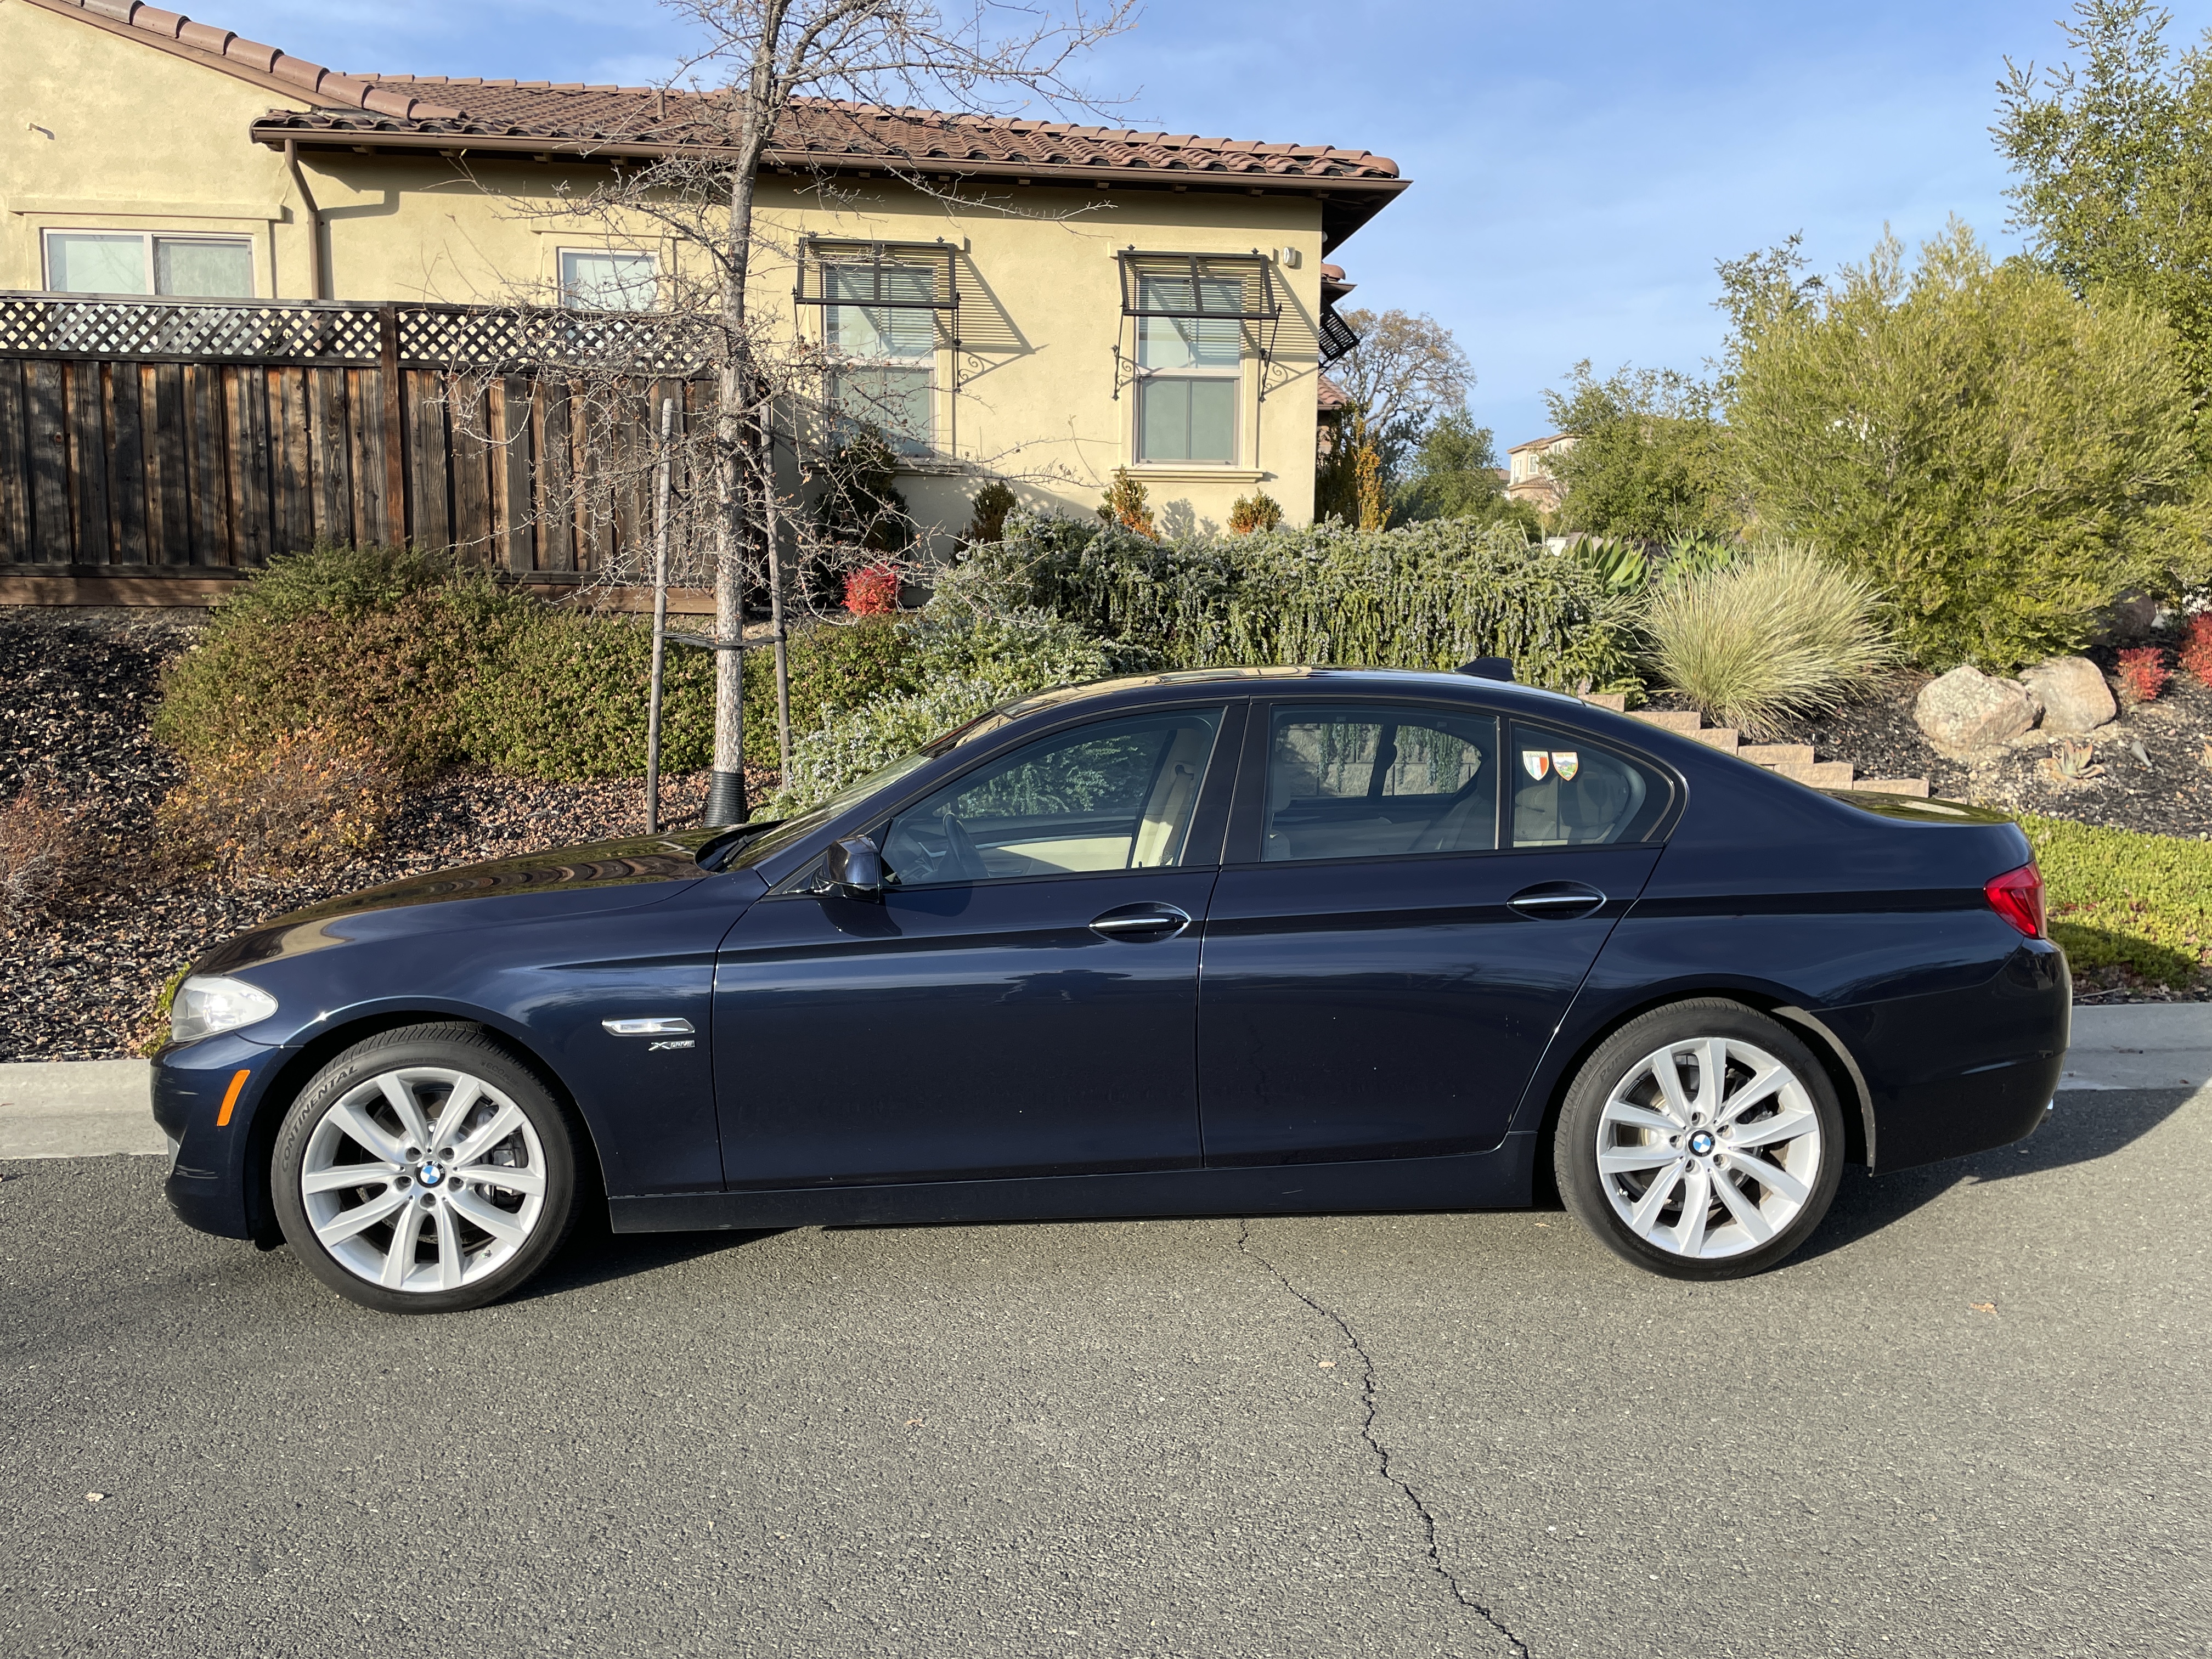 Used 2011 BMW 5 Series Cars for Sale Right Now - Autotrader